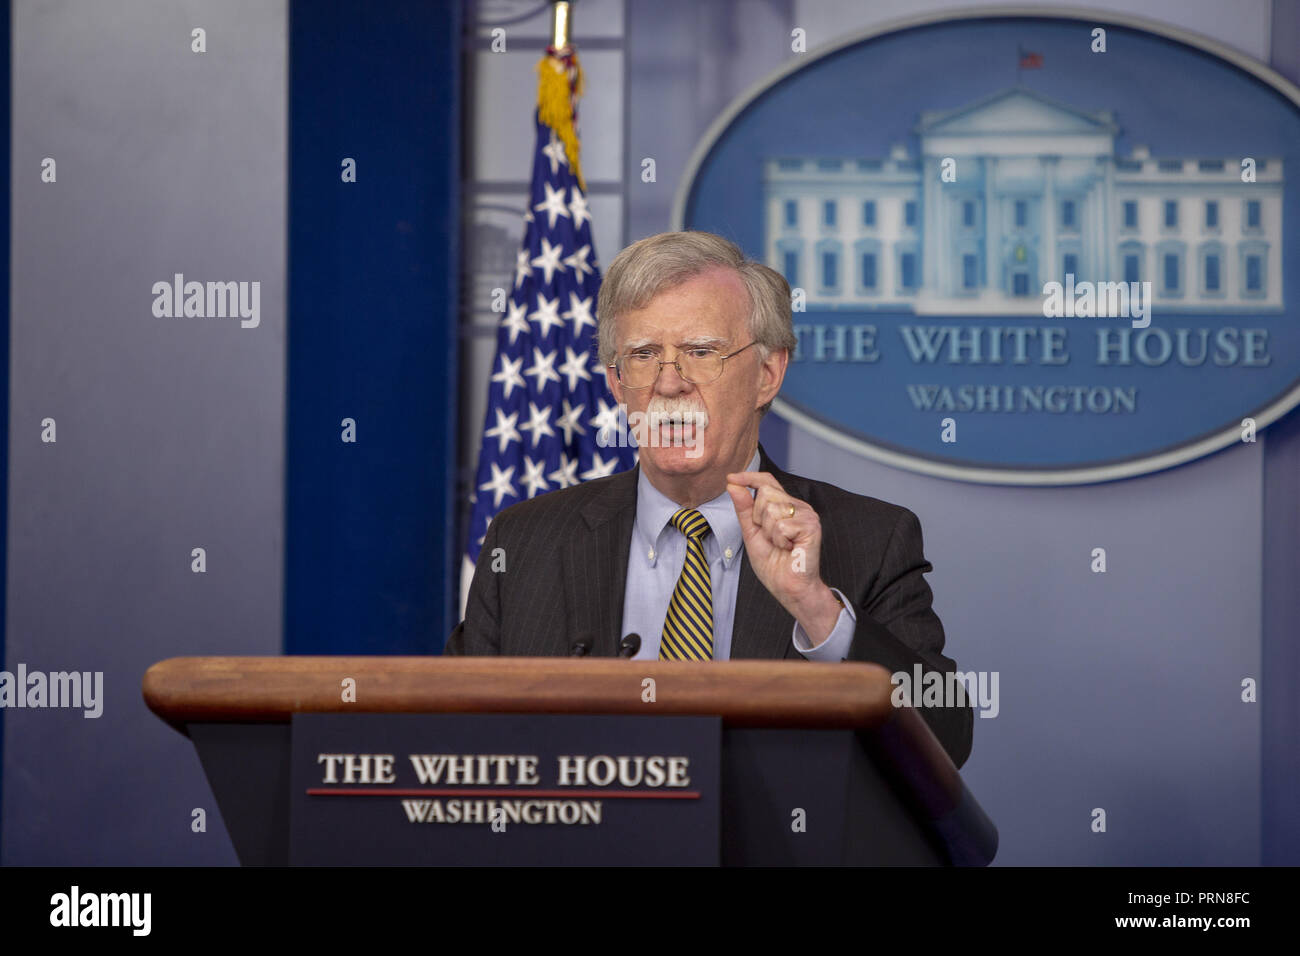 October 3, 2018 - Washington, District of Columbia, U.S. - WASHINGTON, DC: John Bolton, National Security Advisor of the United States speaks during a briefing at the White House on October 3, 2018. .Credit: Tasos Katopodis / CNP (Credit Image: © Tasos Katopodis/CNP via ZUMA Wire) Stock Photo